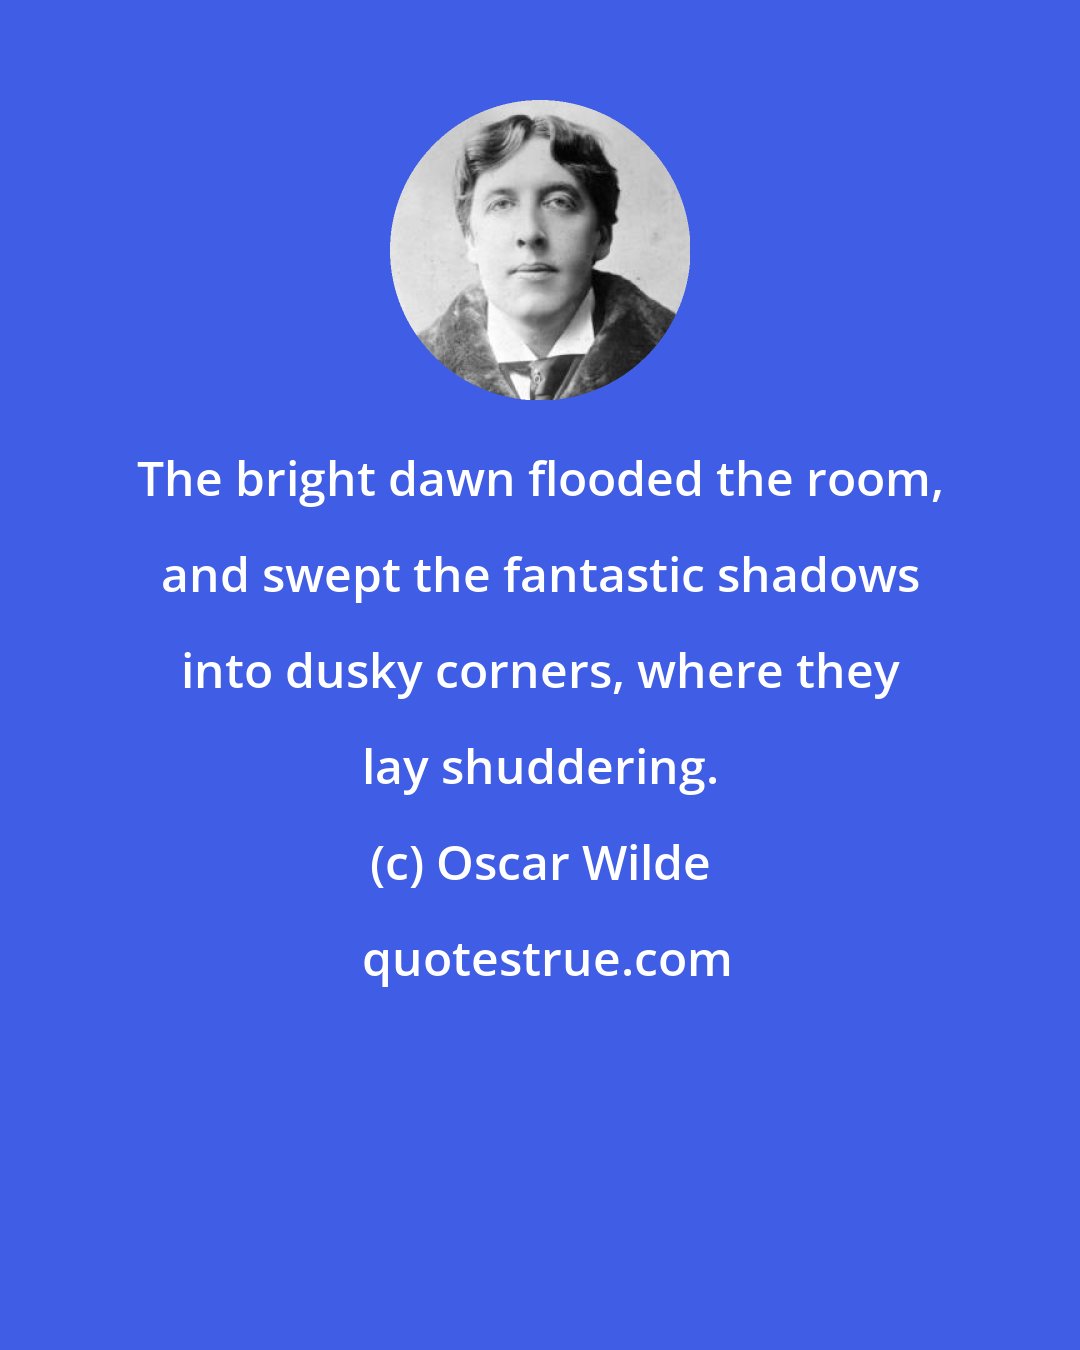 Oscar Wilde: The bright dawn flooded the room, and swept the fantastic shadows into dusky corners, where they lay shuddering.